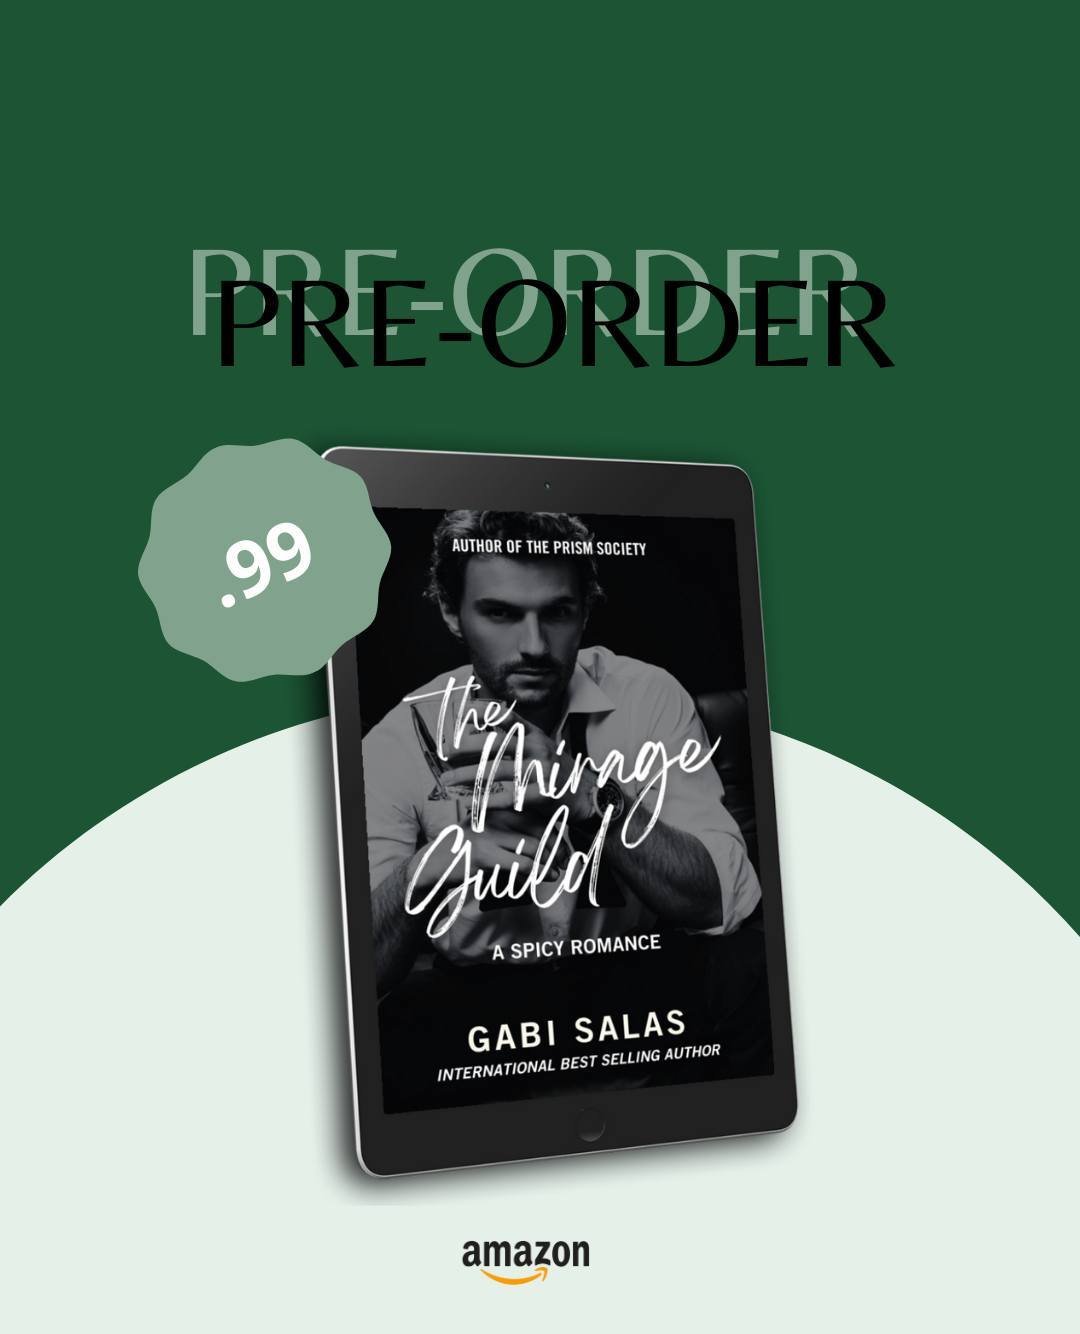 AHHHHHH IT'S FINALLY AVAILABLE FOR PRE-ORDER. The Mirage Guild is now just .99 (link is above or just search for it on Amazon!)⁠
.⁠
Beaches or bartenders? I know which one I&rsquo;d rather be on...⁠
.⁠
Absence has not made Izzy Esposito&rsquo;s heart